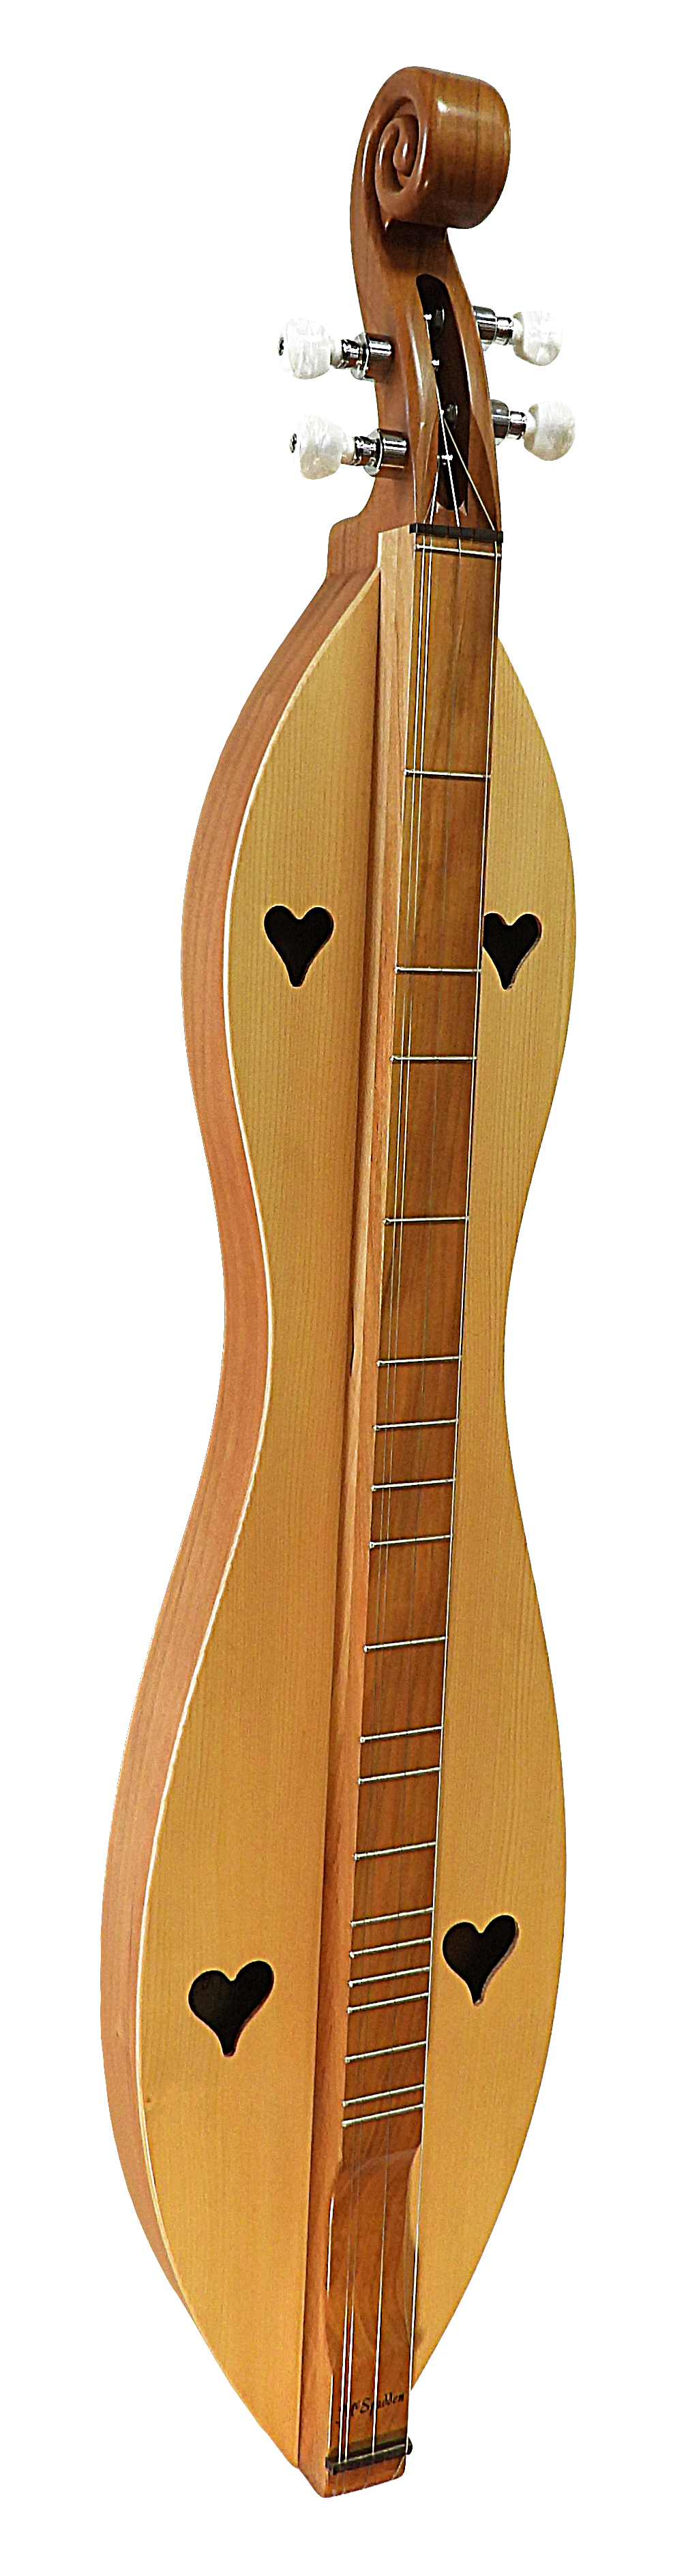 Unfinished handcrafted 4 String, Scroll head, Hourglass with Cherry back and sides, Spruce top violin showing the bare wood body and absent strings and bridge.